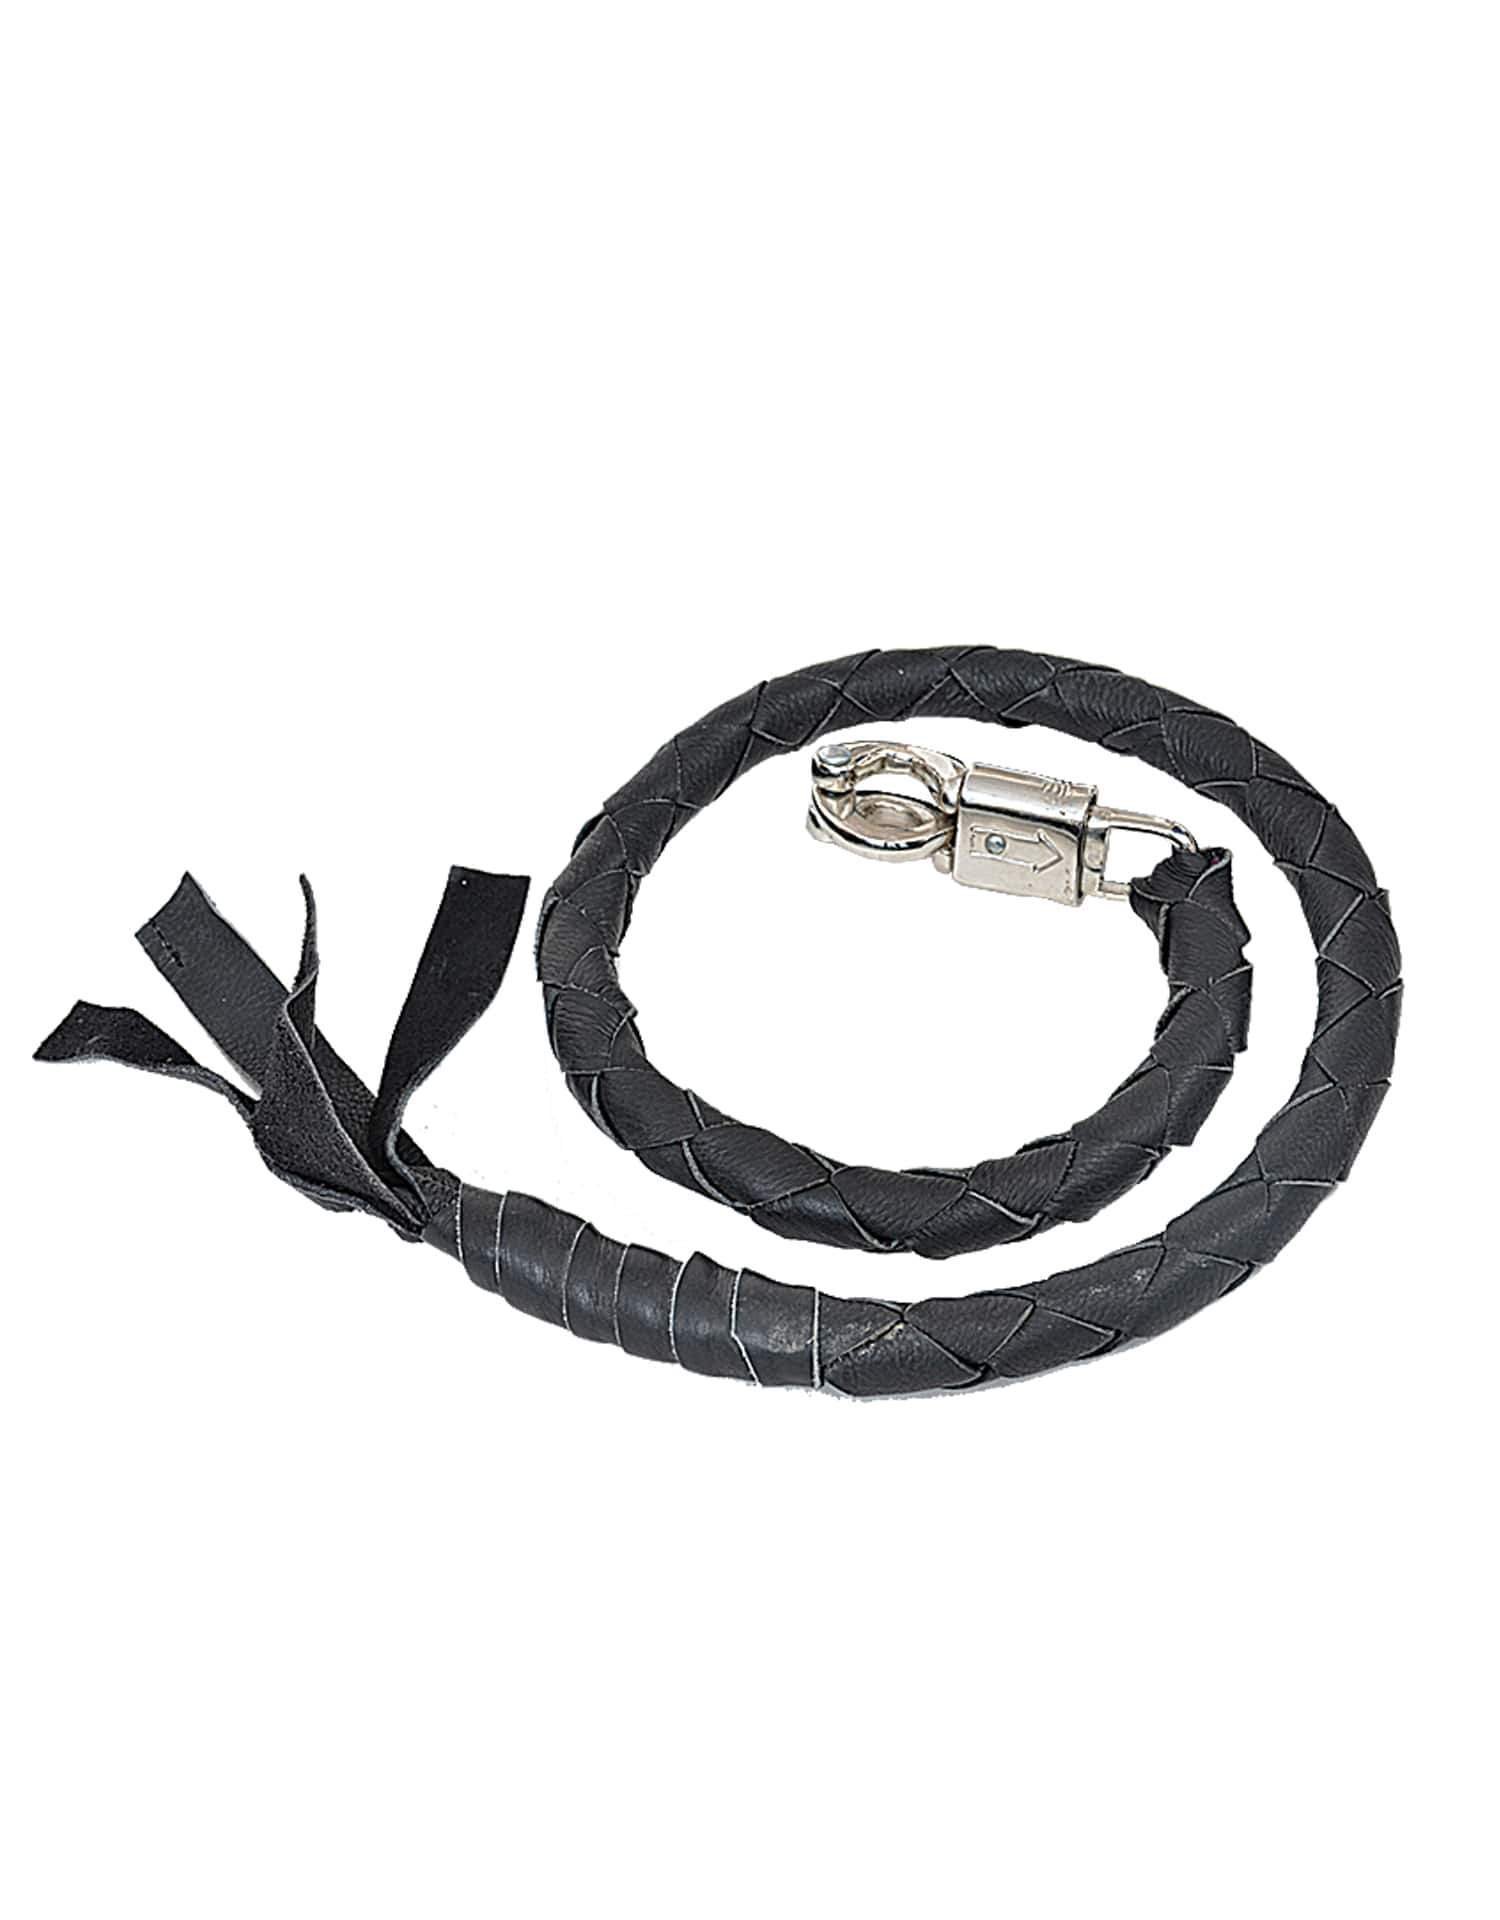 UNIK Biker Motorcycle Get Back Whip in a Variety Of Colors - 2053-00-UN